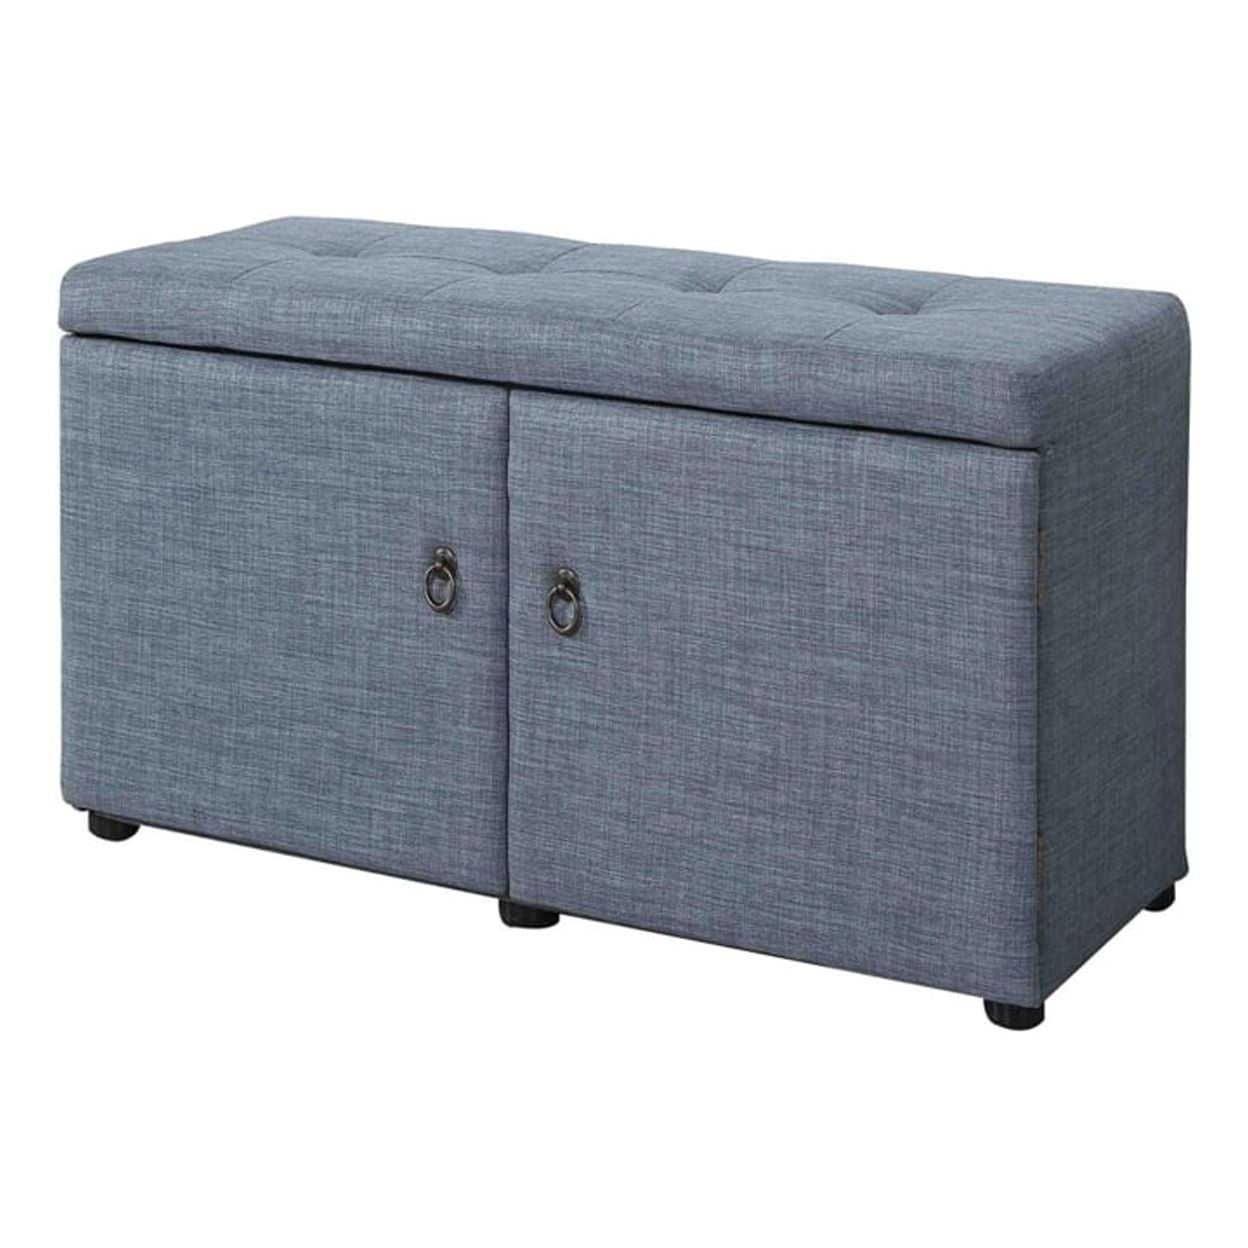 Picture of Benjara BM204192 Fabric Upholstered Shoe Storage Bench with Button Tufted Seating - Blue - 17.5 x 16 x 40.5 in.